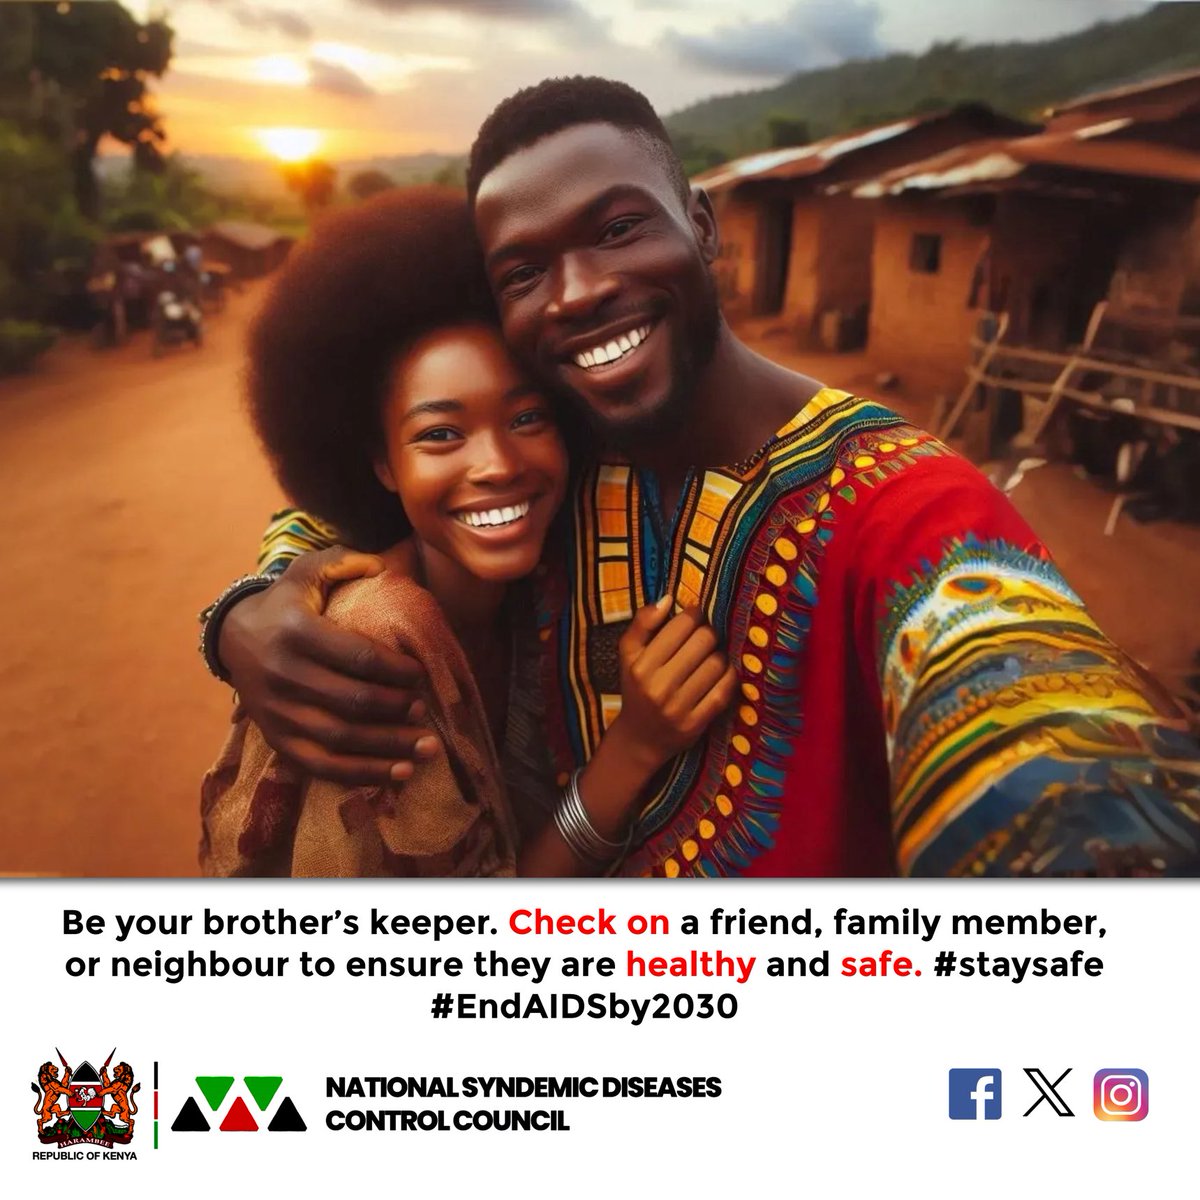 #Mentalhealth . Be your brother's keeper. Check on a friend, family member, or neighbour to ensure they are healthy and safe. #staysafe
#EndAIDSby2030